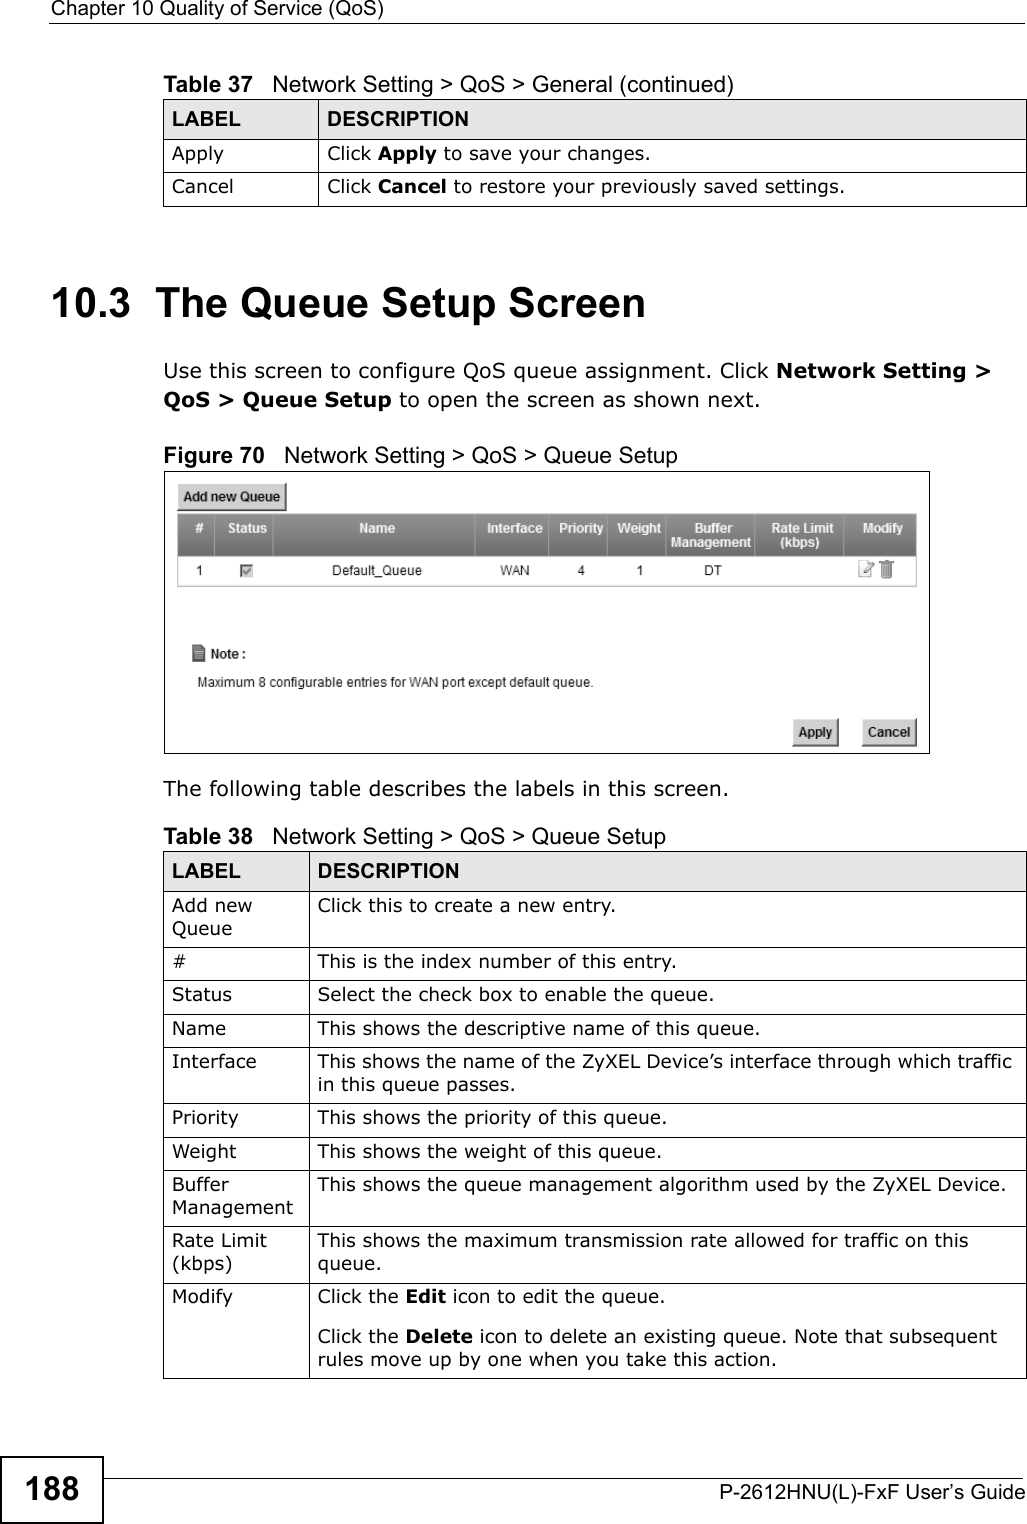 Chapter 10 Quality of Service (QoS)P-2612HNU(L)-FxF User’s Guide18810.3  The Queue Setup ScreenUse this screen to configure QoS queue assignment. Click Network Setting &gt;QoS &gt; Queue Setup to open the screen as shown next. Figure 70   Network Setting &gt; QoS &gt; Queue Setup The following table describes the labels in this screen. Apply Click Apply to save your changes.Cancel Click Cancel to restore your previously saved settings.Table 37   Network Setting &gt; QoS &gt; General (continued)LABEL DESCRIPTIONTable 38   Network Setting &gt; QoS &gt; Queue SetupLABEL DESCRIPTIONAdd newQueueClick this to create a new entry.# This is the index number of this entry.Status Select the check box to enable the queue.Name This shows the descriptive name of this queue.Interface This shows the name of the ZyXEL Device’s interface through which traffic in this queue passes.Priority This shows the priority of this queue.Weight This shows the weight of this queue.Buffer Management This shows the queue management algorithm used by the ZyXEL Device.Rate Limit (kbps)This shows the maximum transmission rate allowed for traffic on this queue.Modify Click the Edit icon to edit the queue.Click the Delete icon to delete an existing queue. Note that subsequent rules move up by one when you take this action.